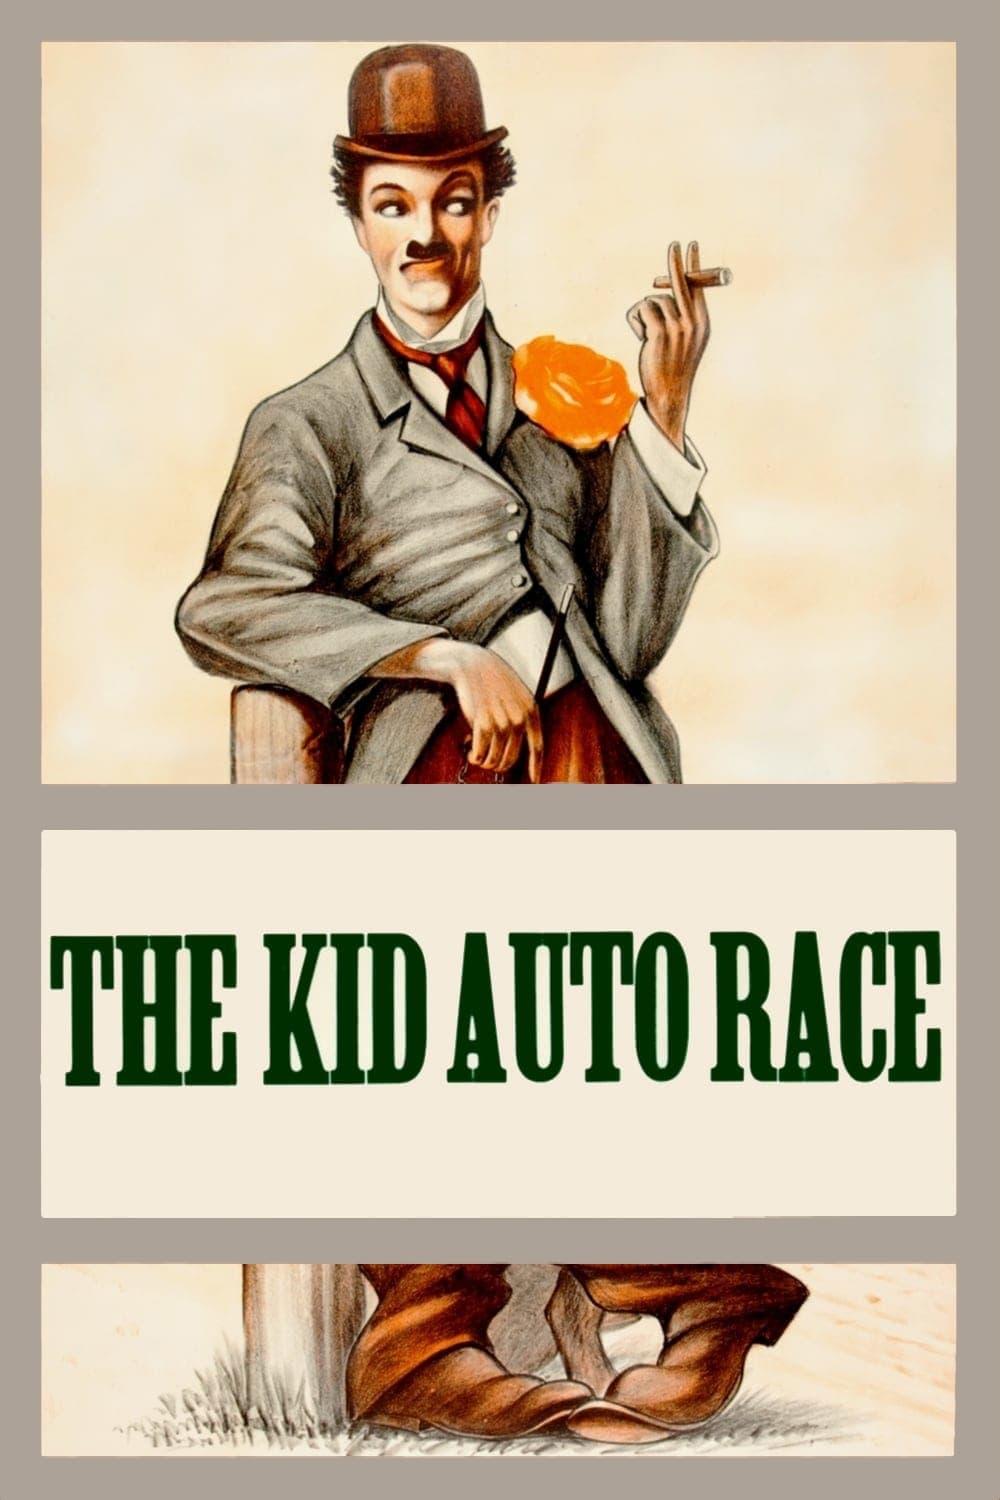 Kid Auto Races at Venice poster